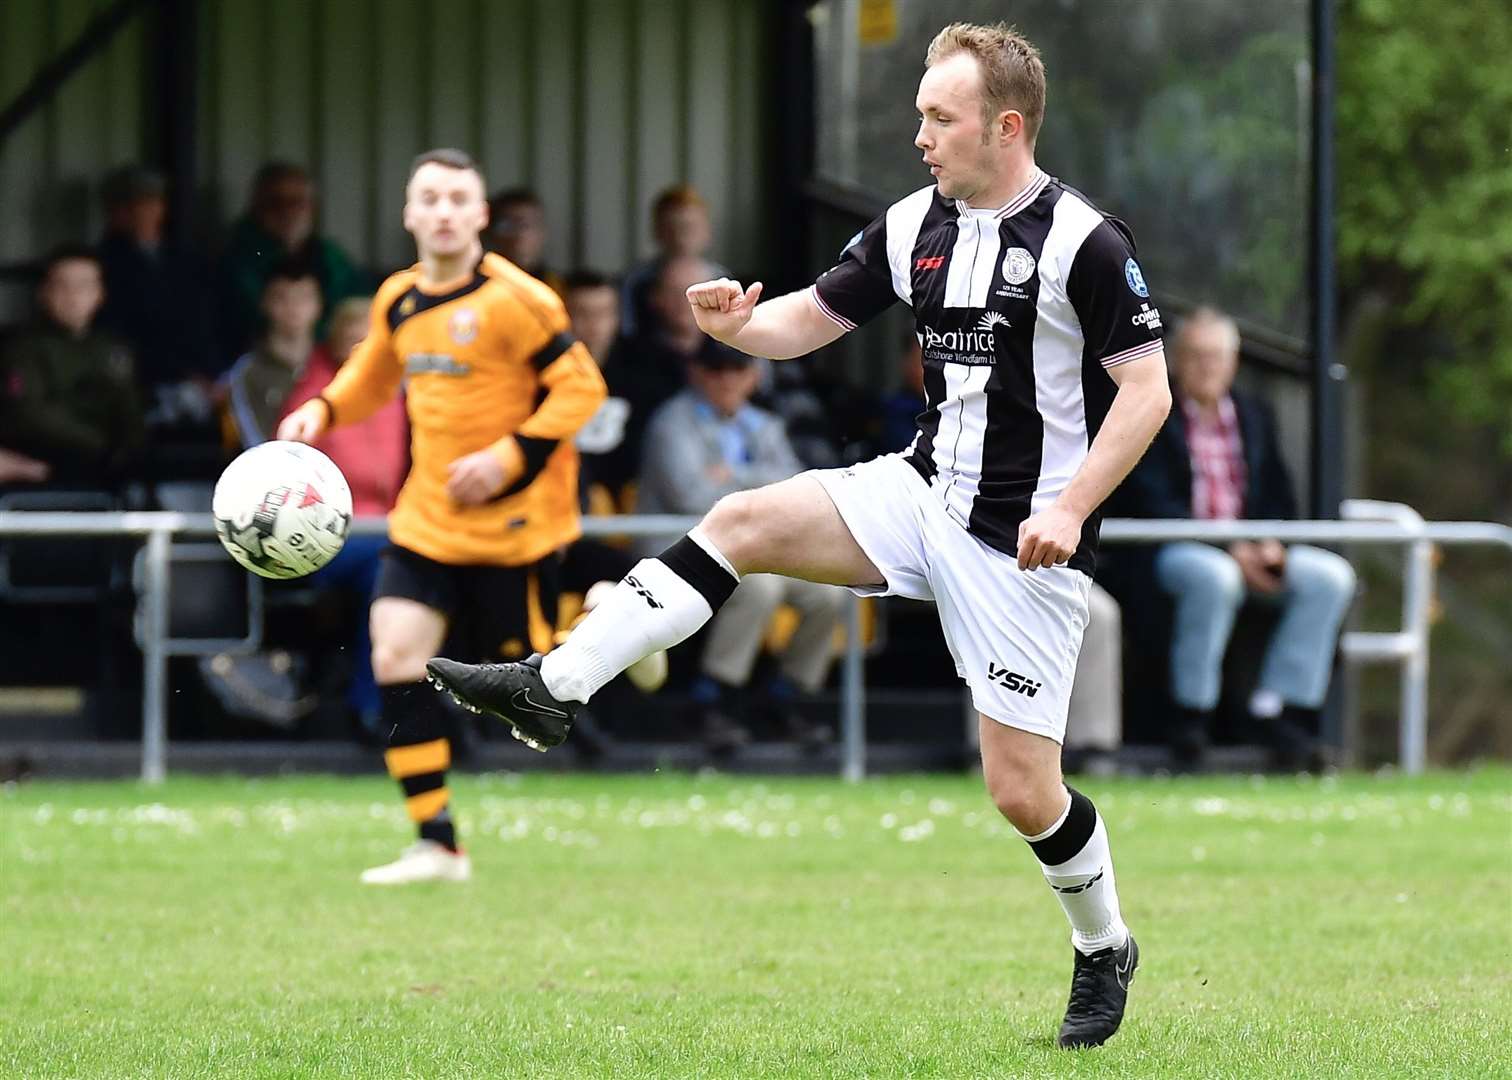 Richard Macadie controls the ball during Academy's 5-1 win at bottom club Fort William on the final day of season 2018/19. Picture: Mel Roger